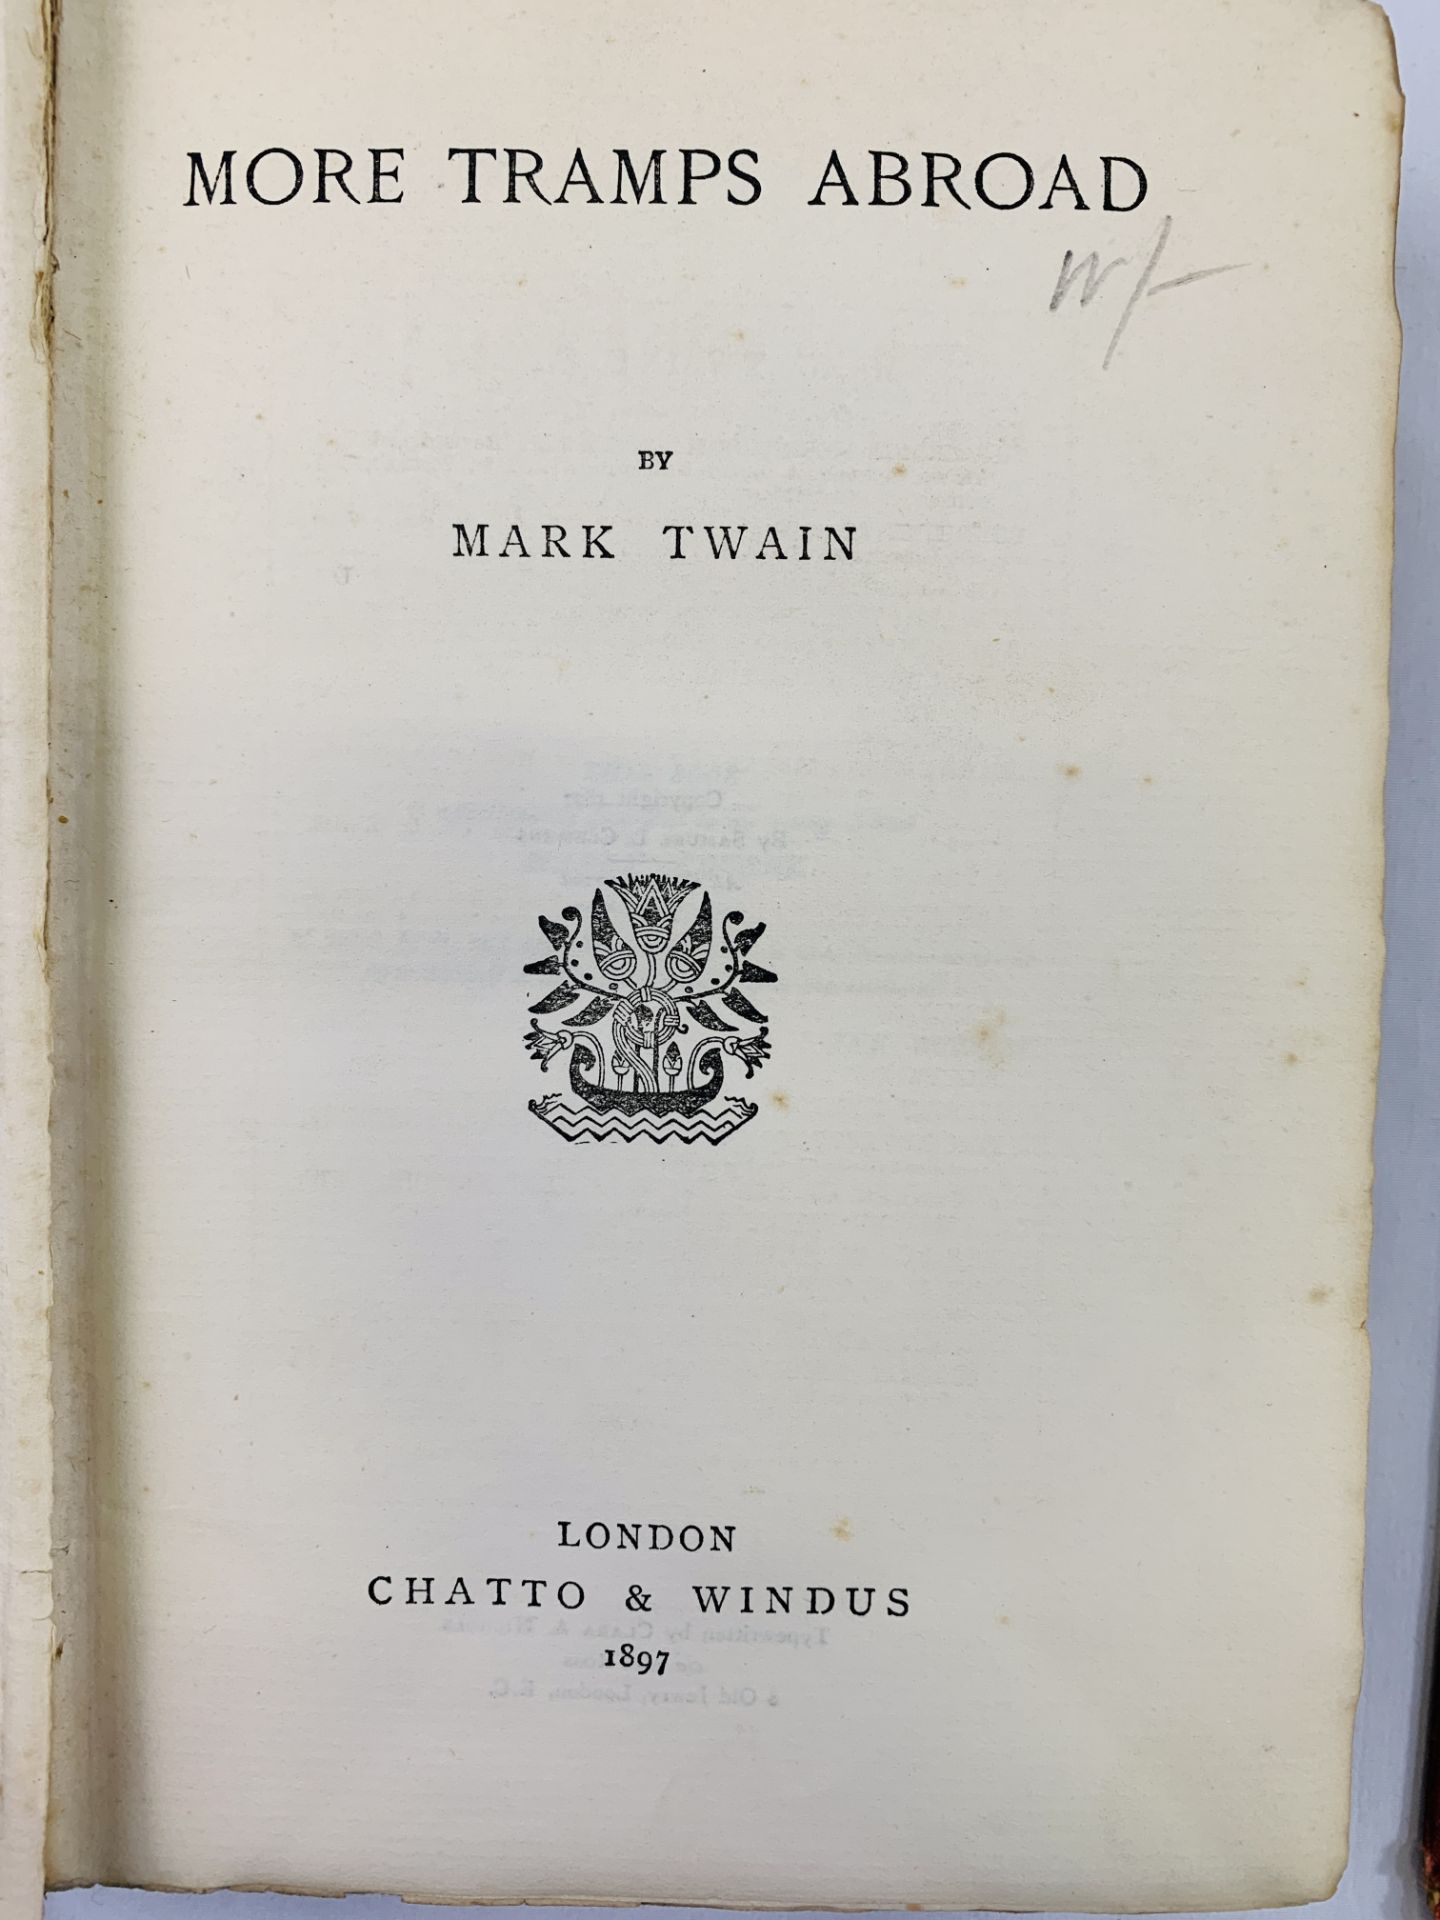 A Tramp Abroad together with More Tramps Abroad by Mark Twain - Image 4 of 9